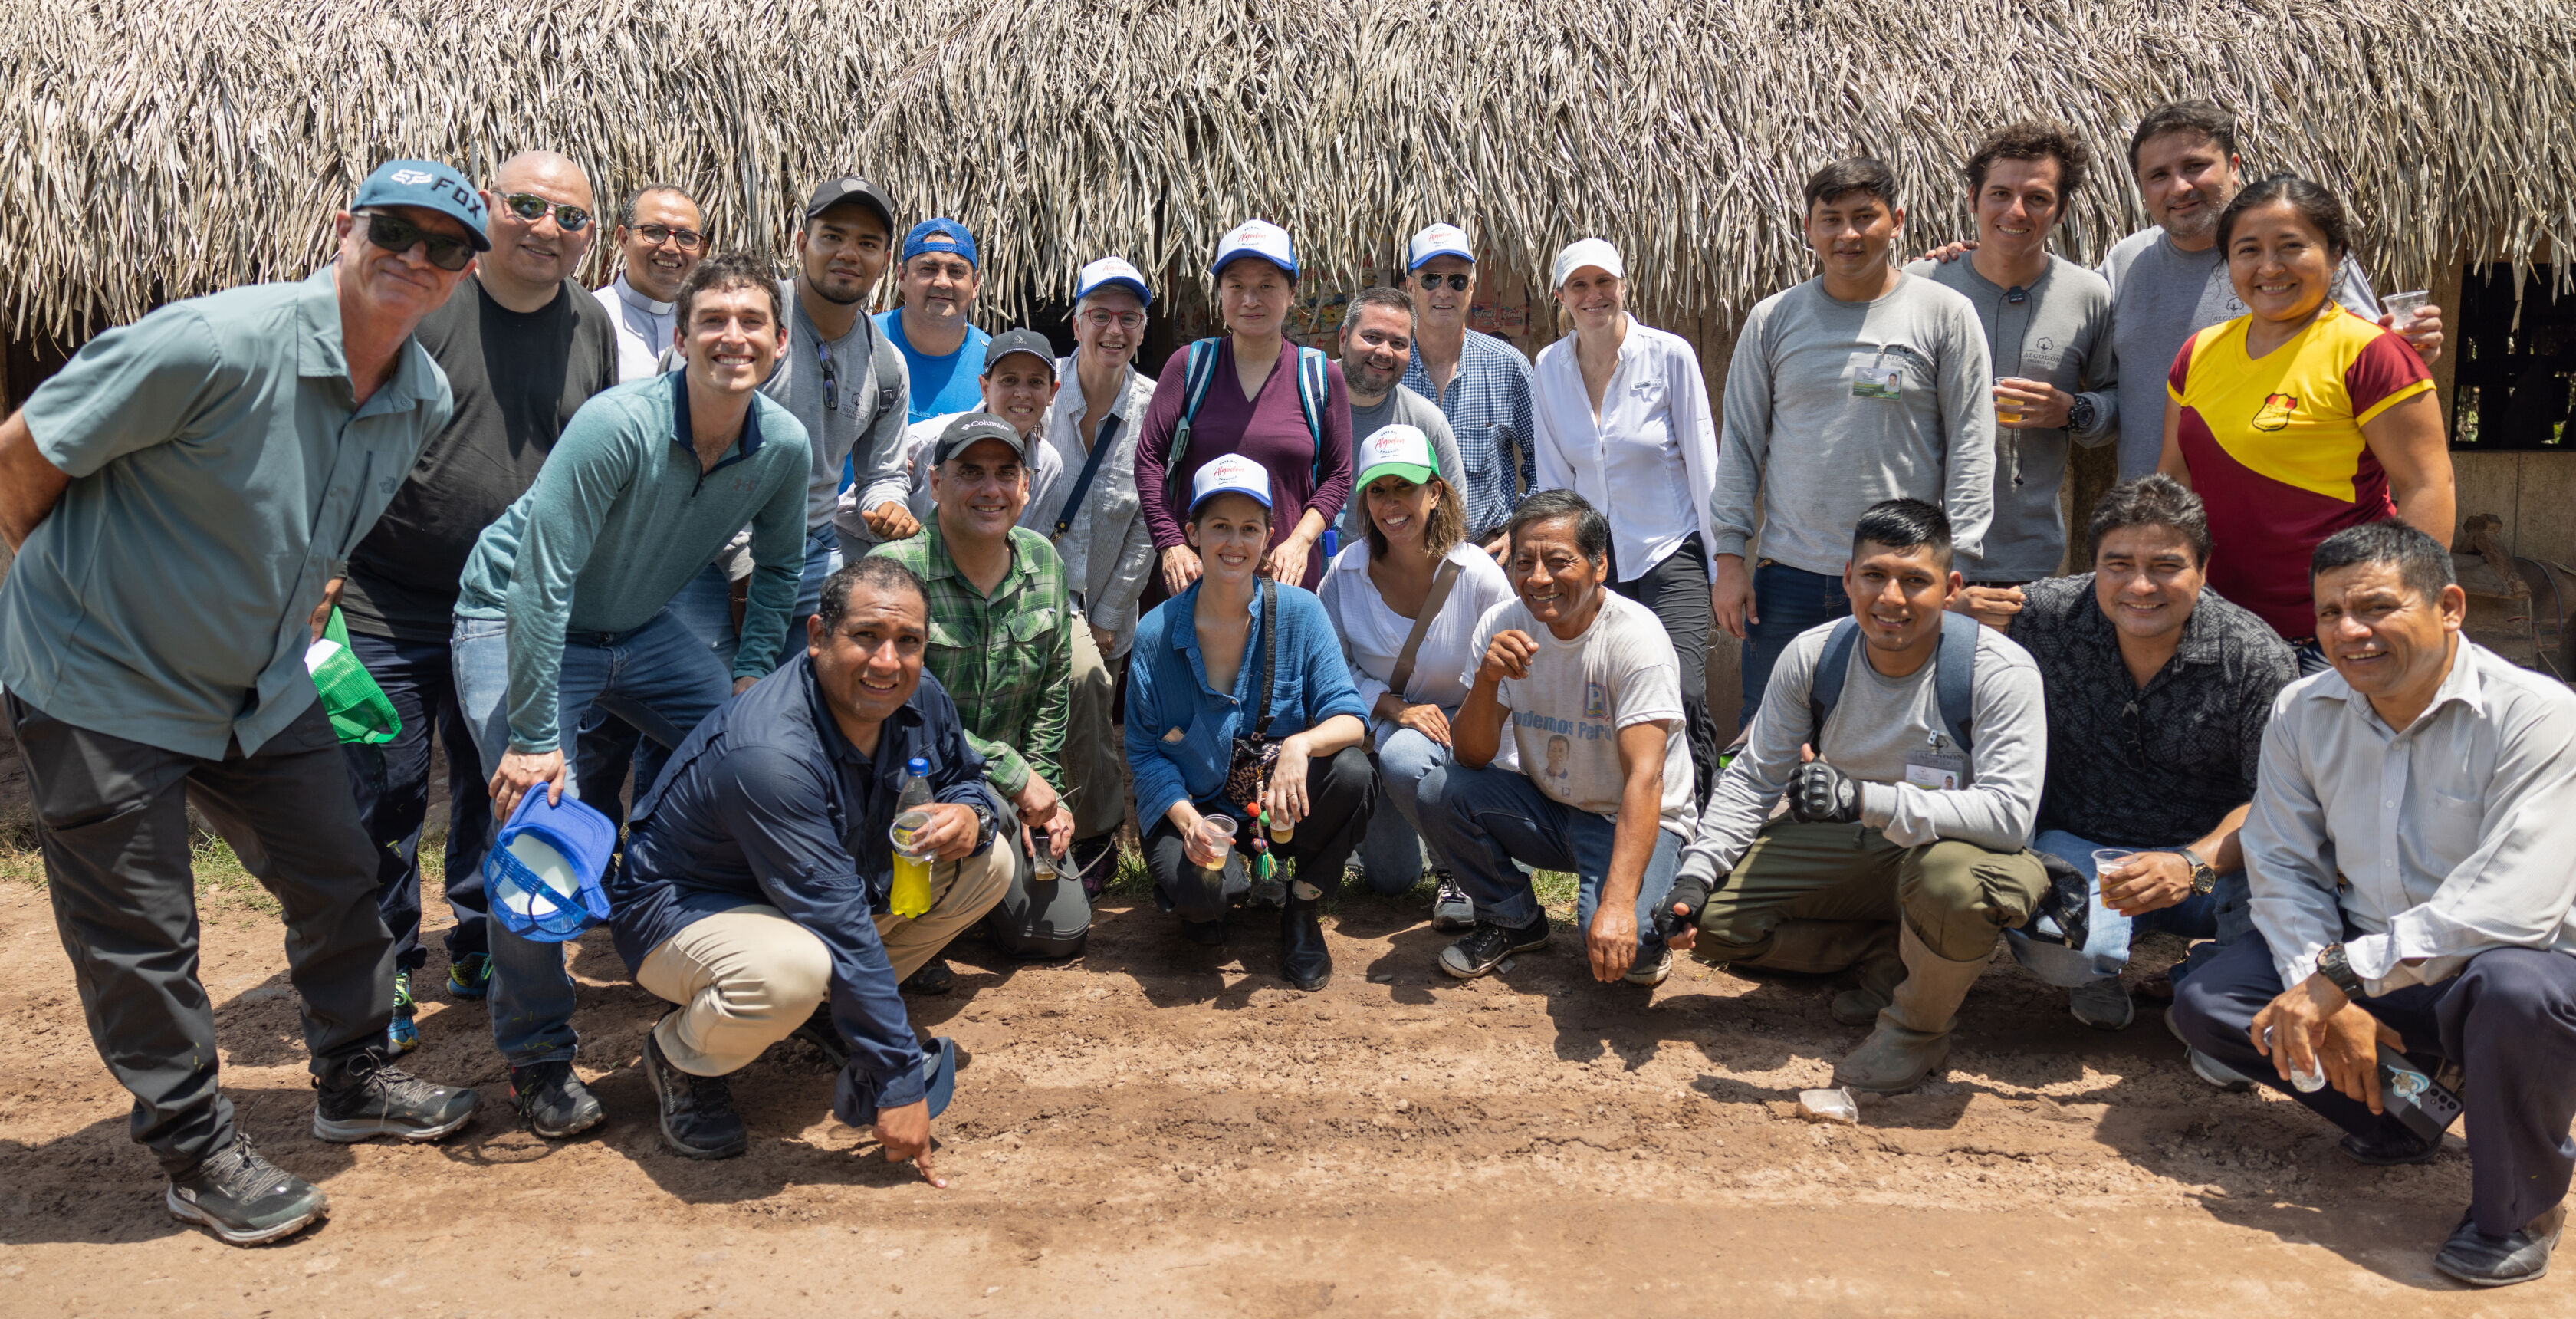 EILEEN FISHER supply chain team and key partners in Peru.